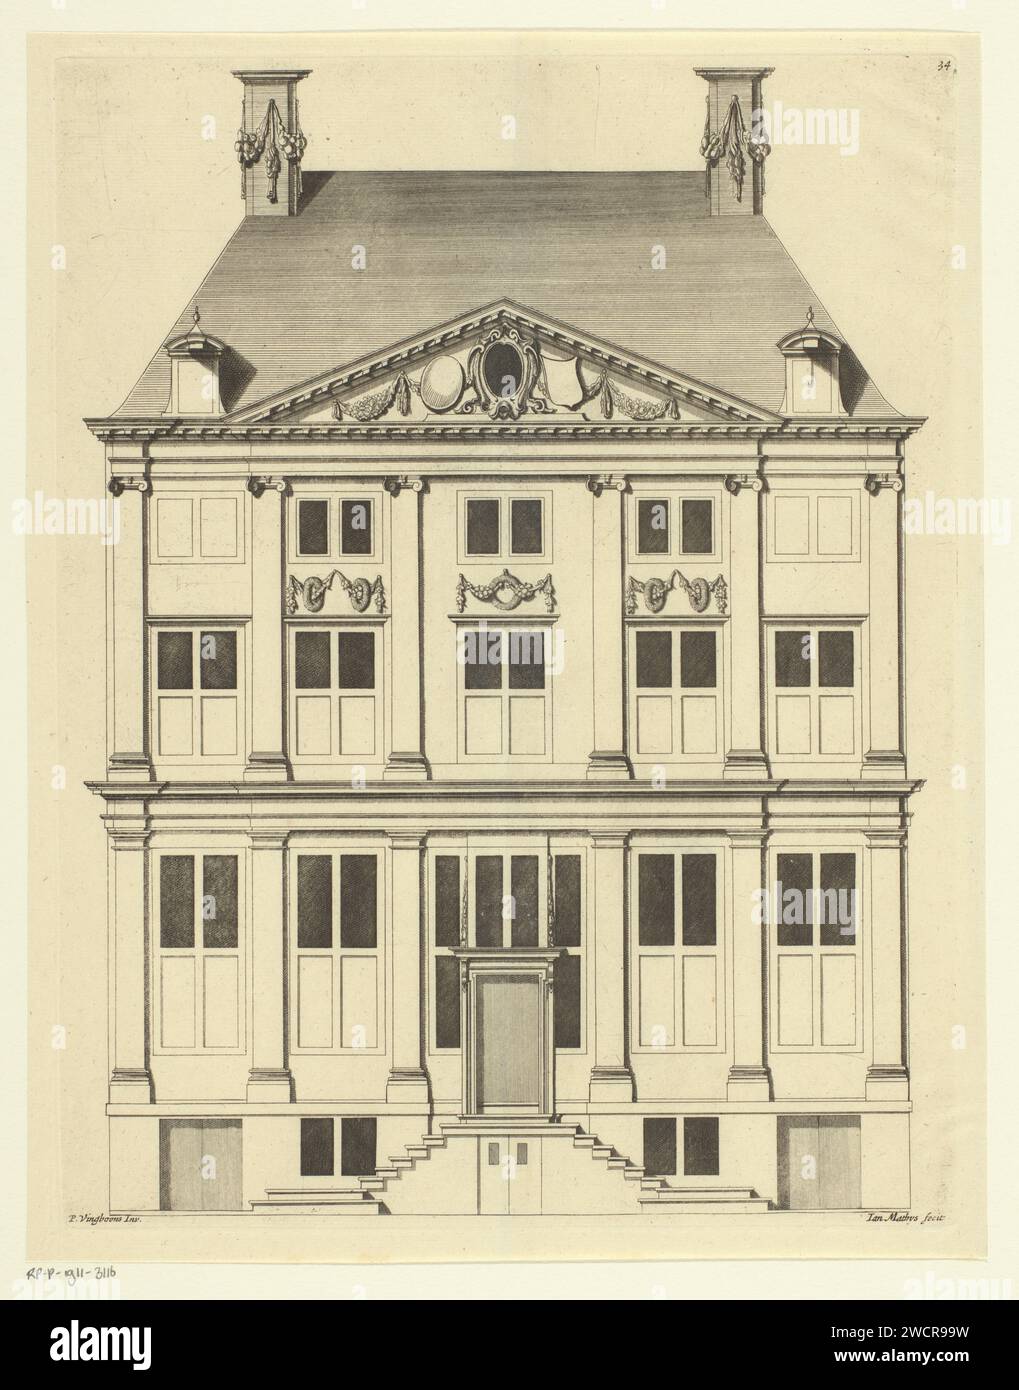 Facade of a house in Amsterdam, Jan Matthysz., After Philips VinckBoons (II), 1674 print Front the house on Herengracht 386 in Amsterdam, which was commissioned by Karel Gerards to design by Philips Vingboons. Amsterdam paper etching / engraving exterior  architectural design or model Stock Photo